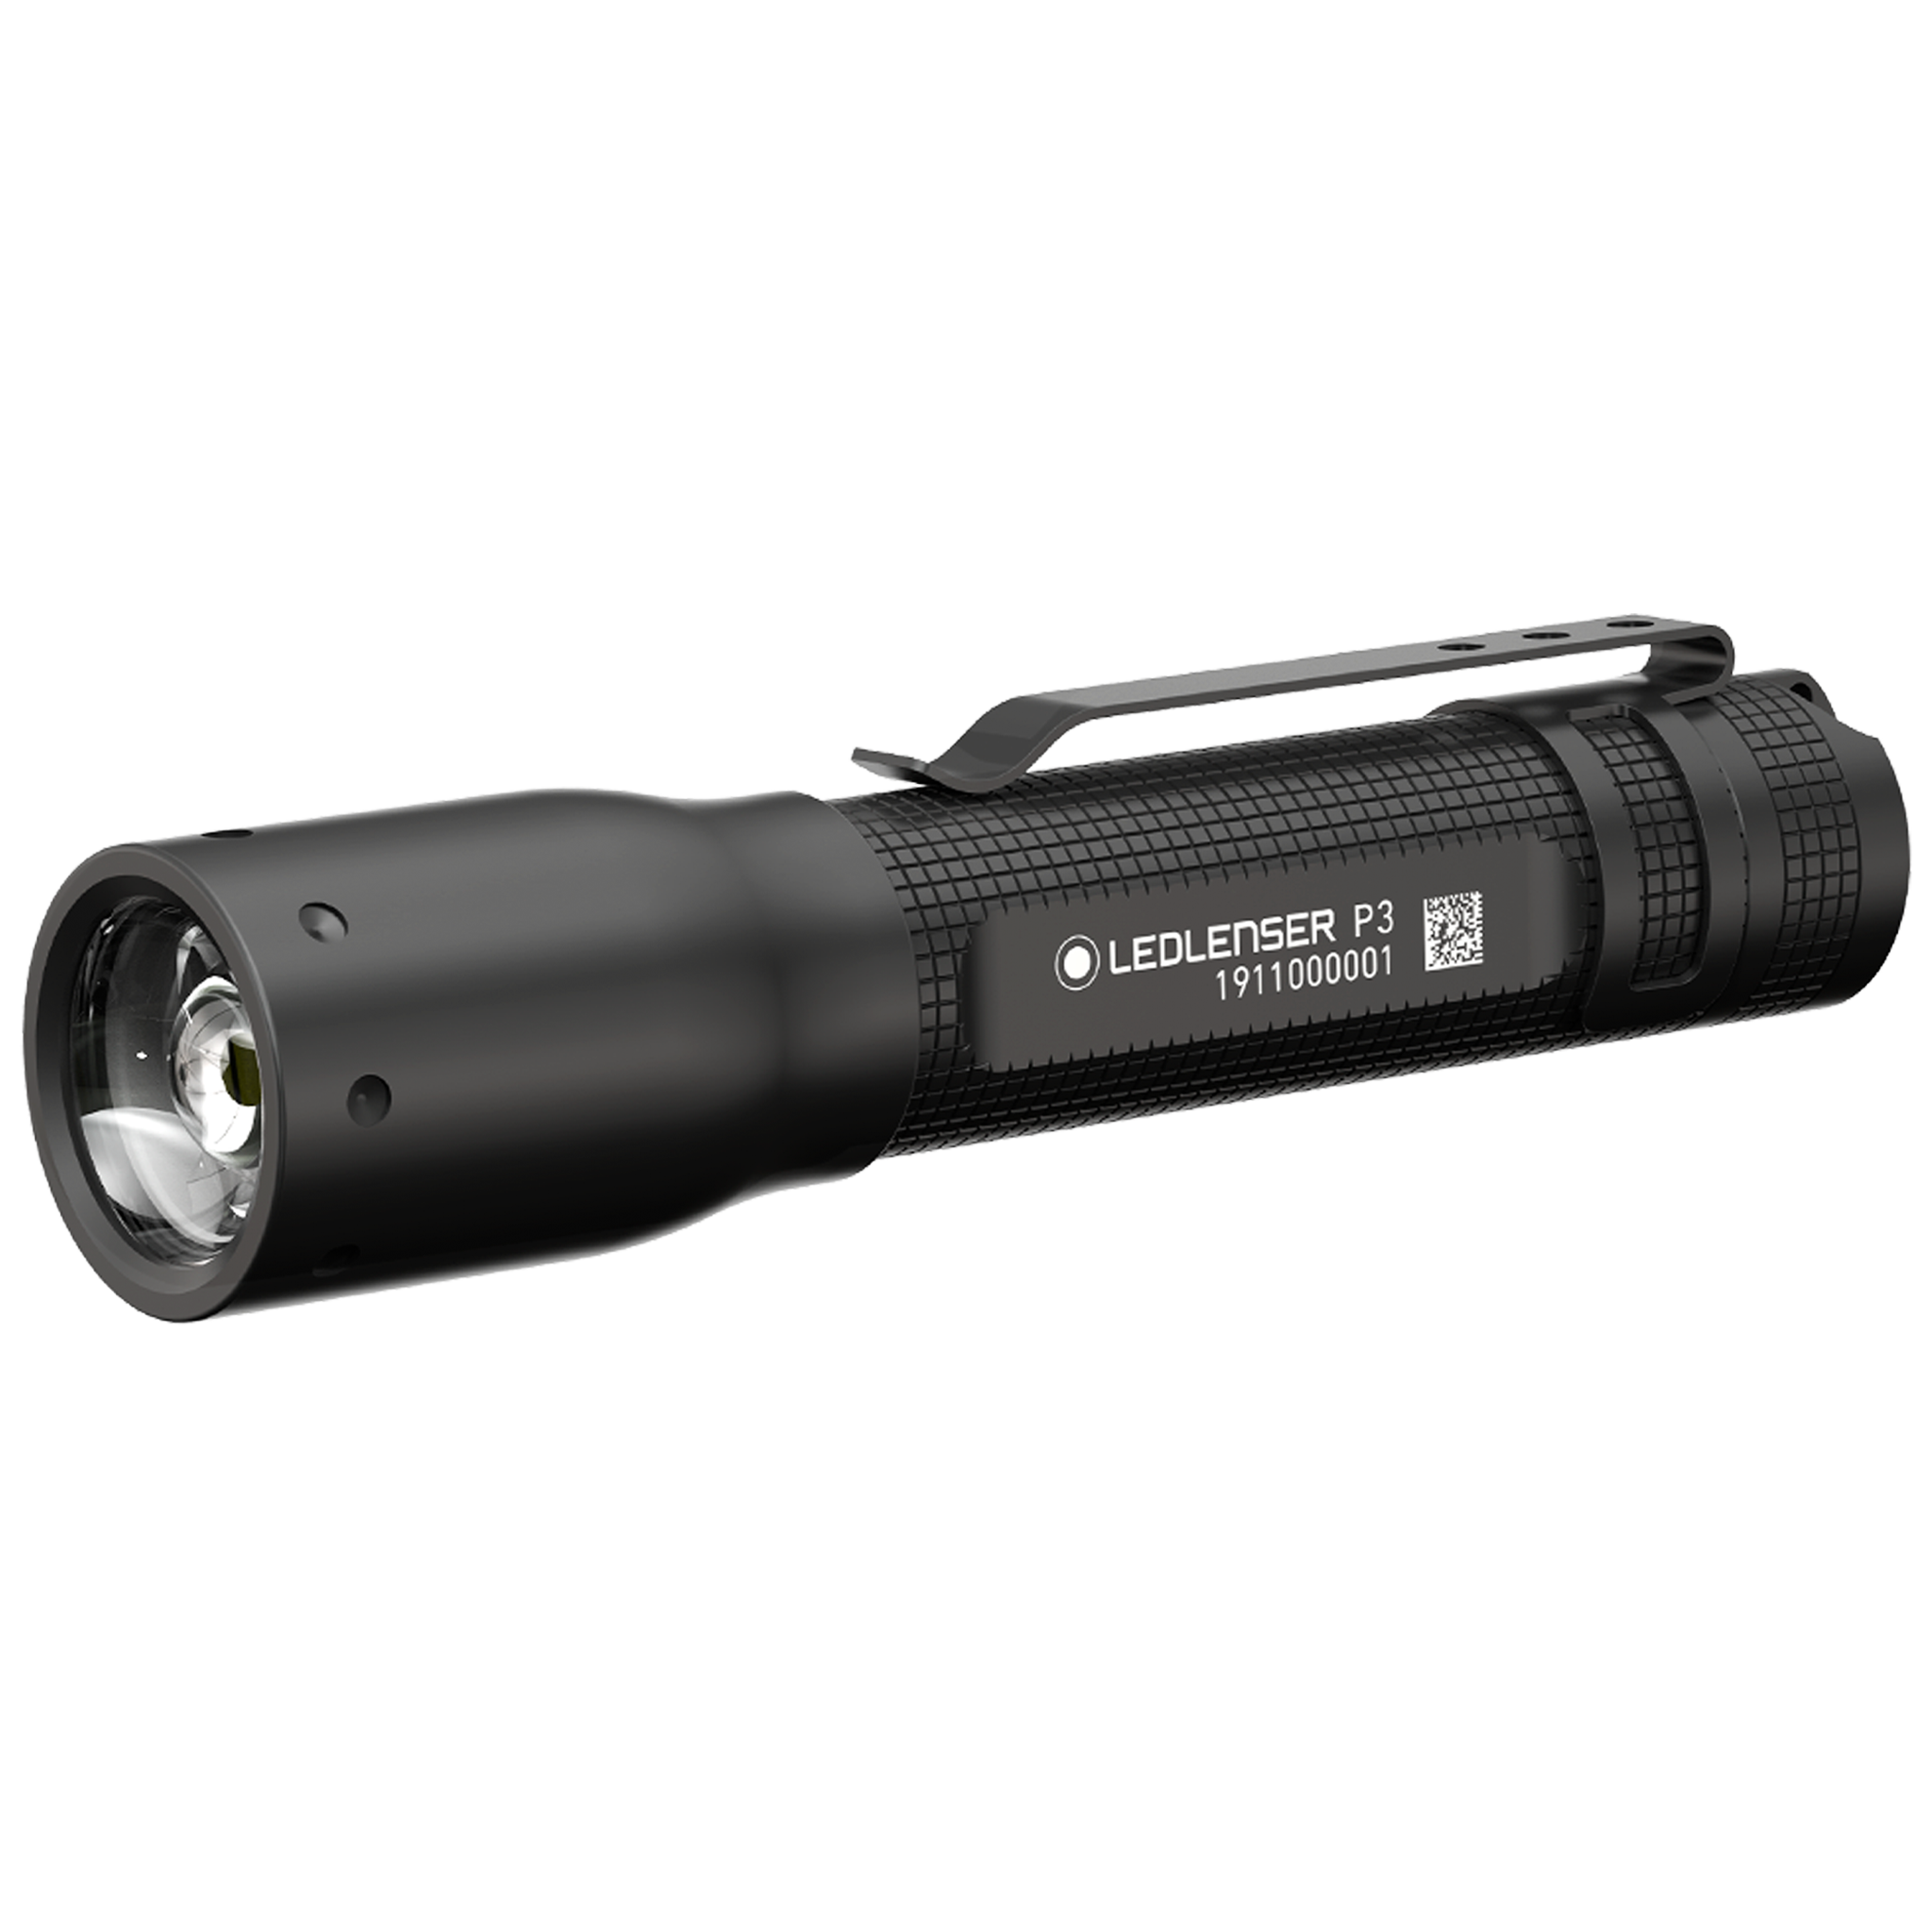 P3 Battery Operated Torch